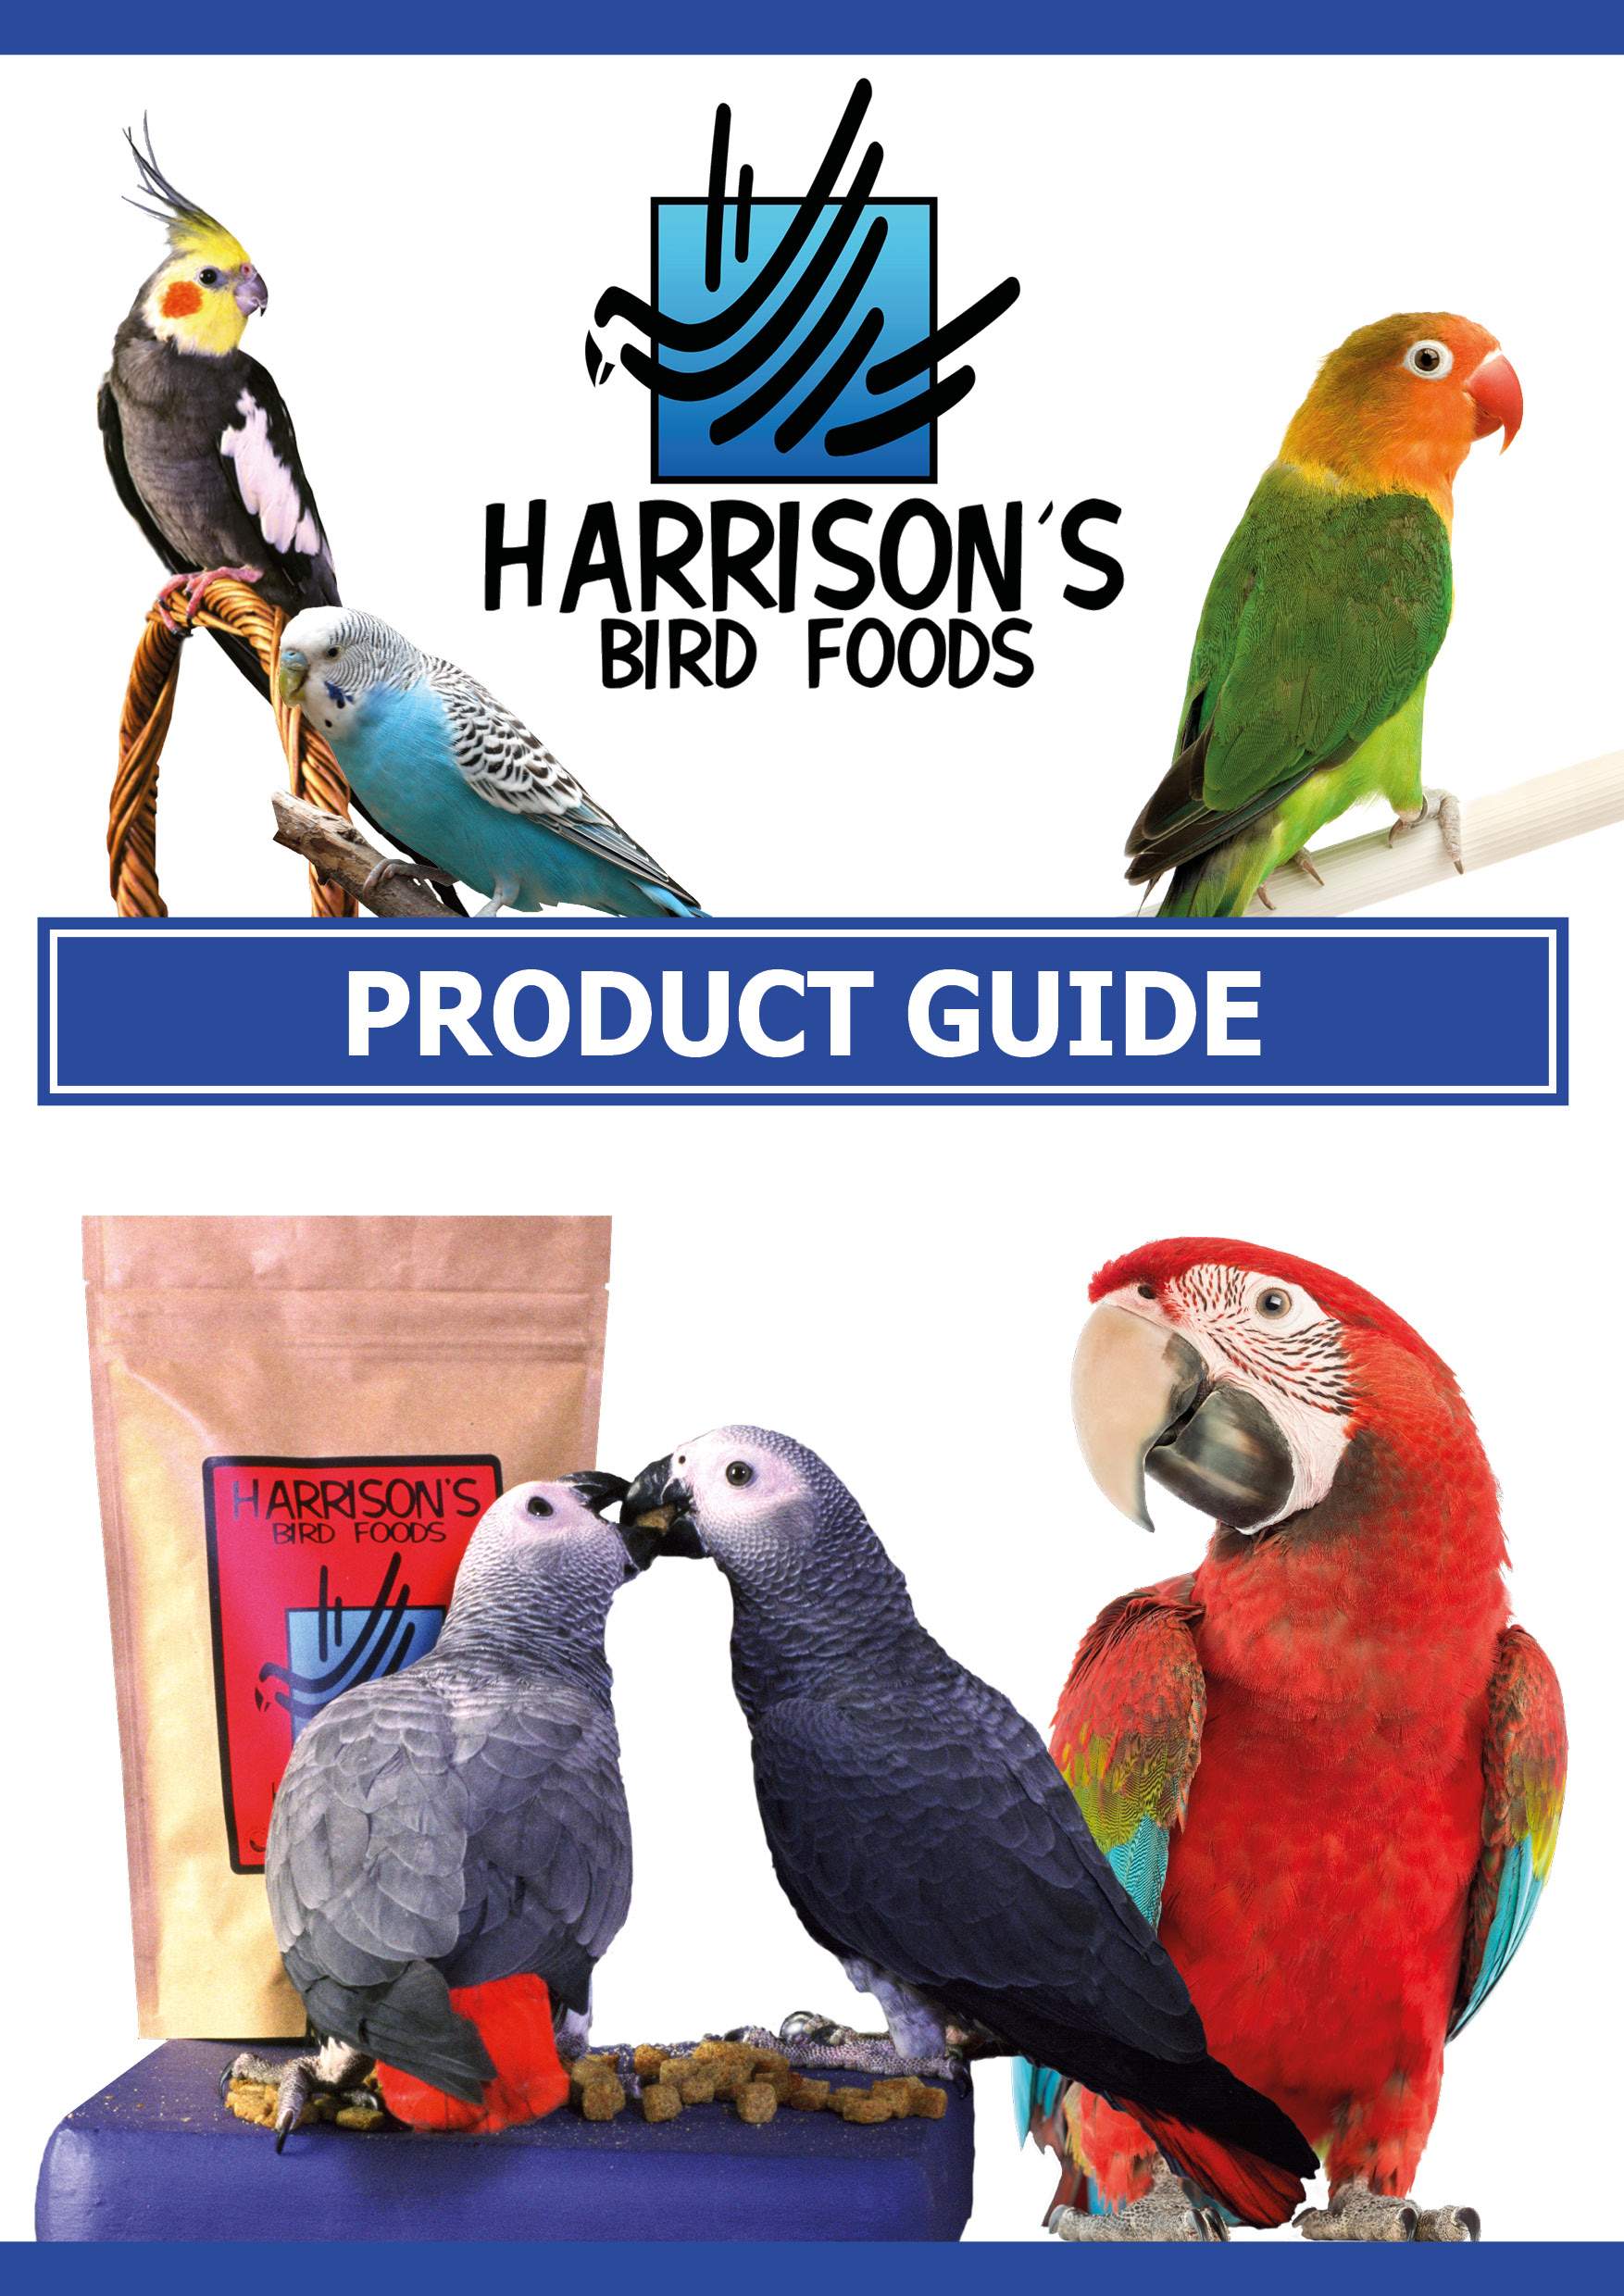 The cover of Harrison's Bird Foods Product Guide